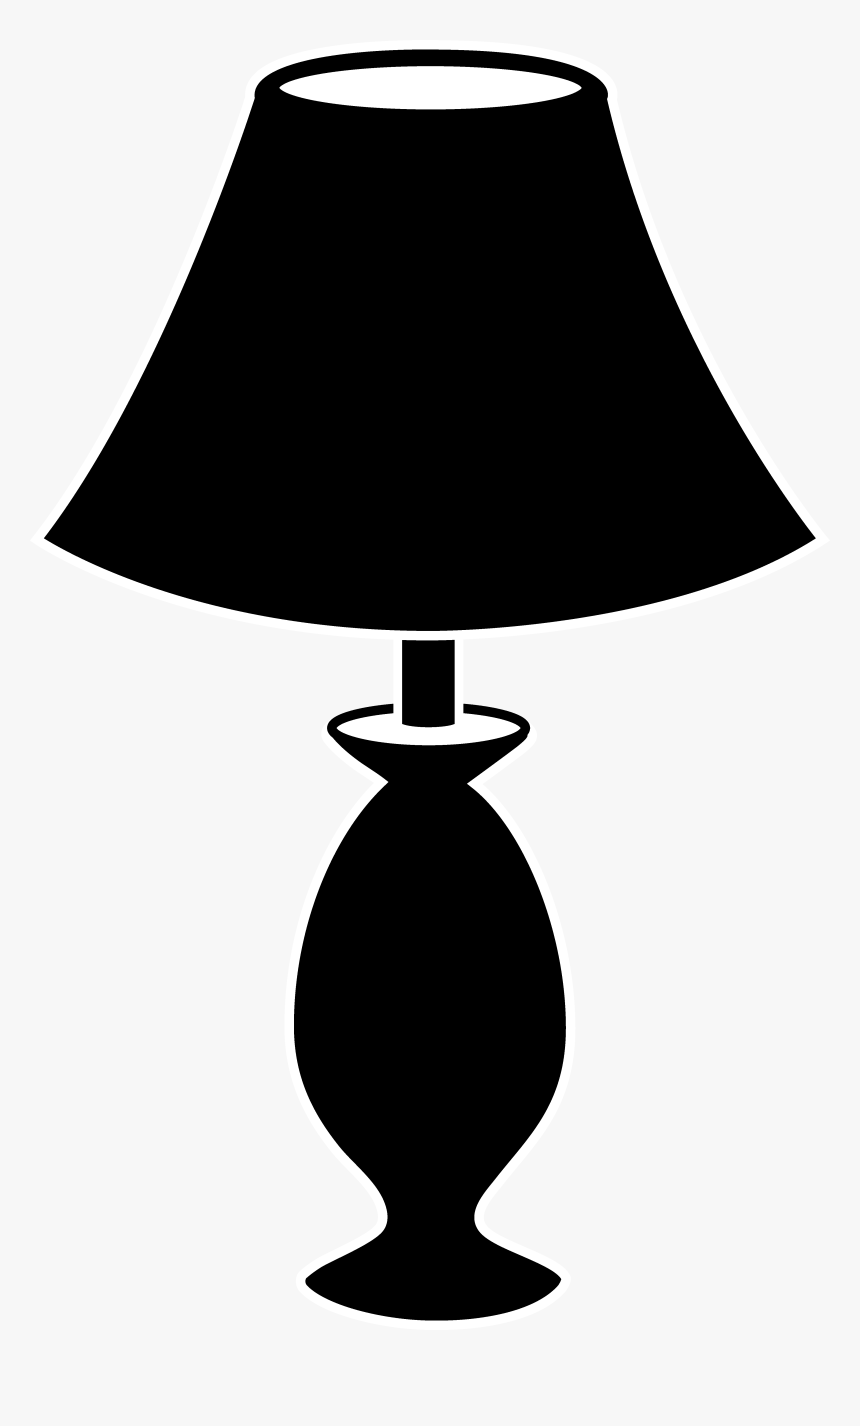 Black Lamp Silhouette Lamp Clipart Black And White Hd Png Download